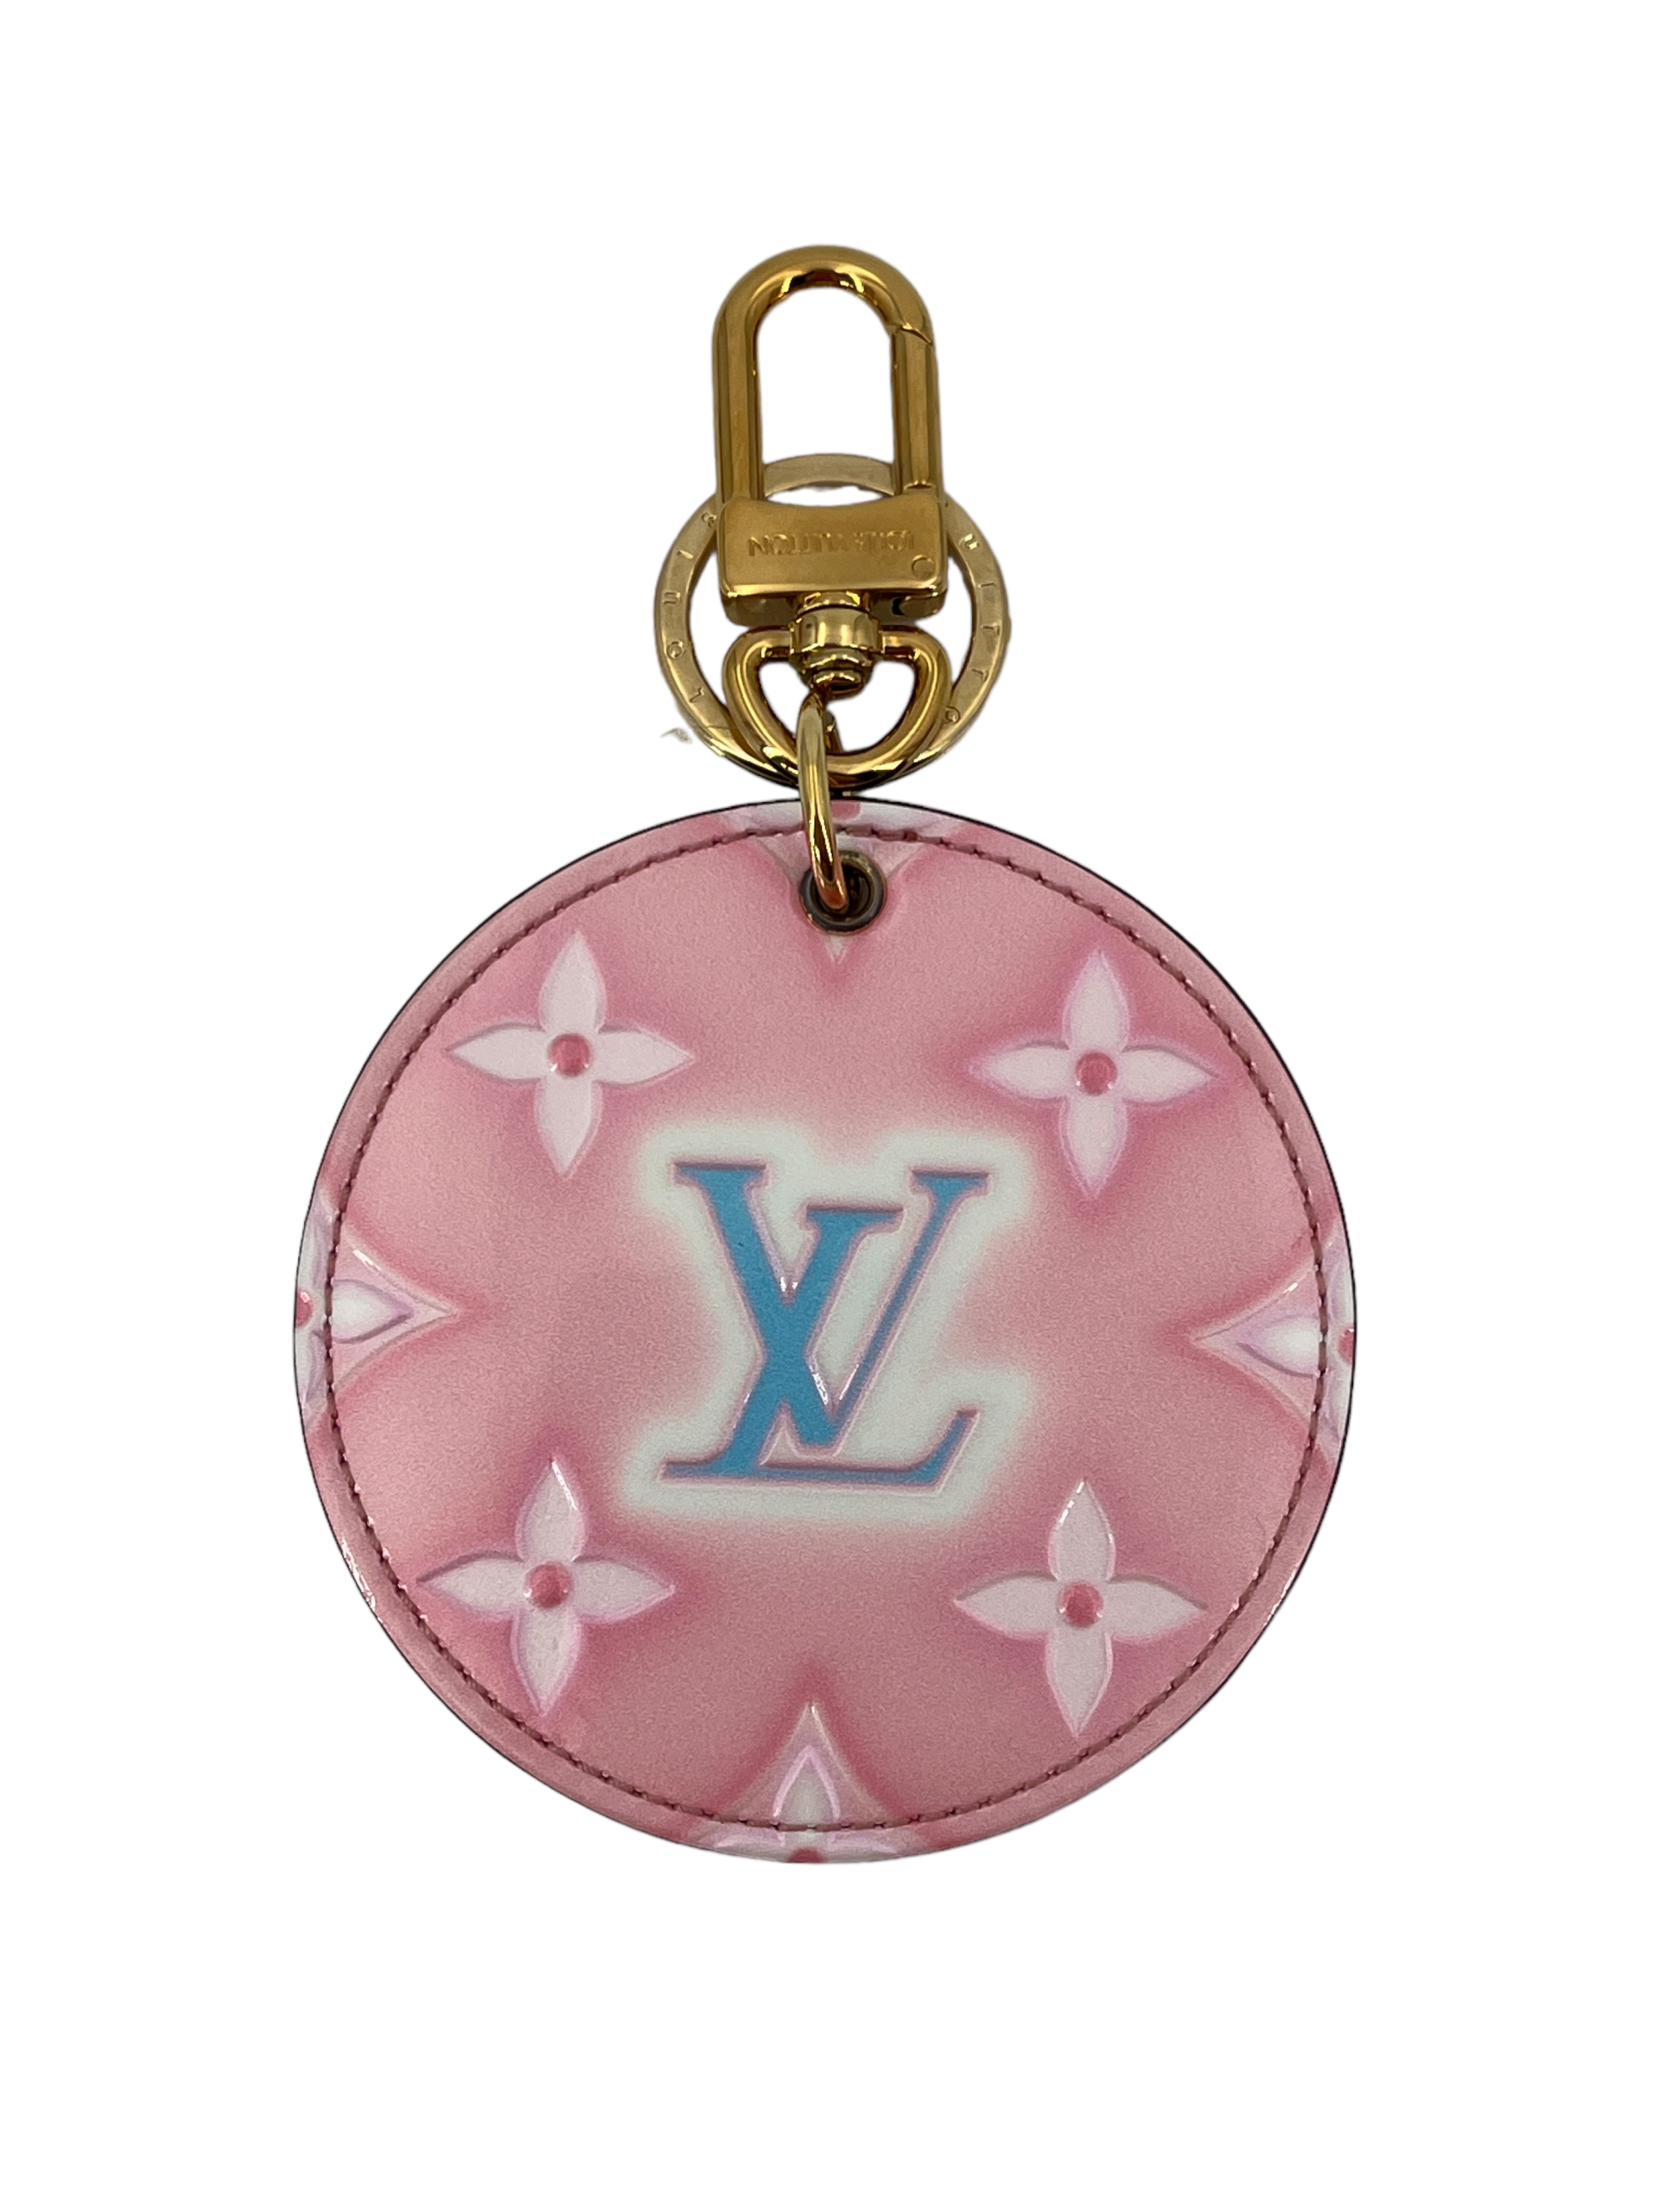 Louis Vuitton Suede Rose Hollow Flower Key Chain and Bag Charm